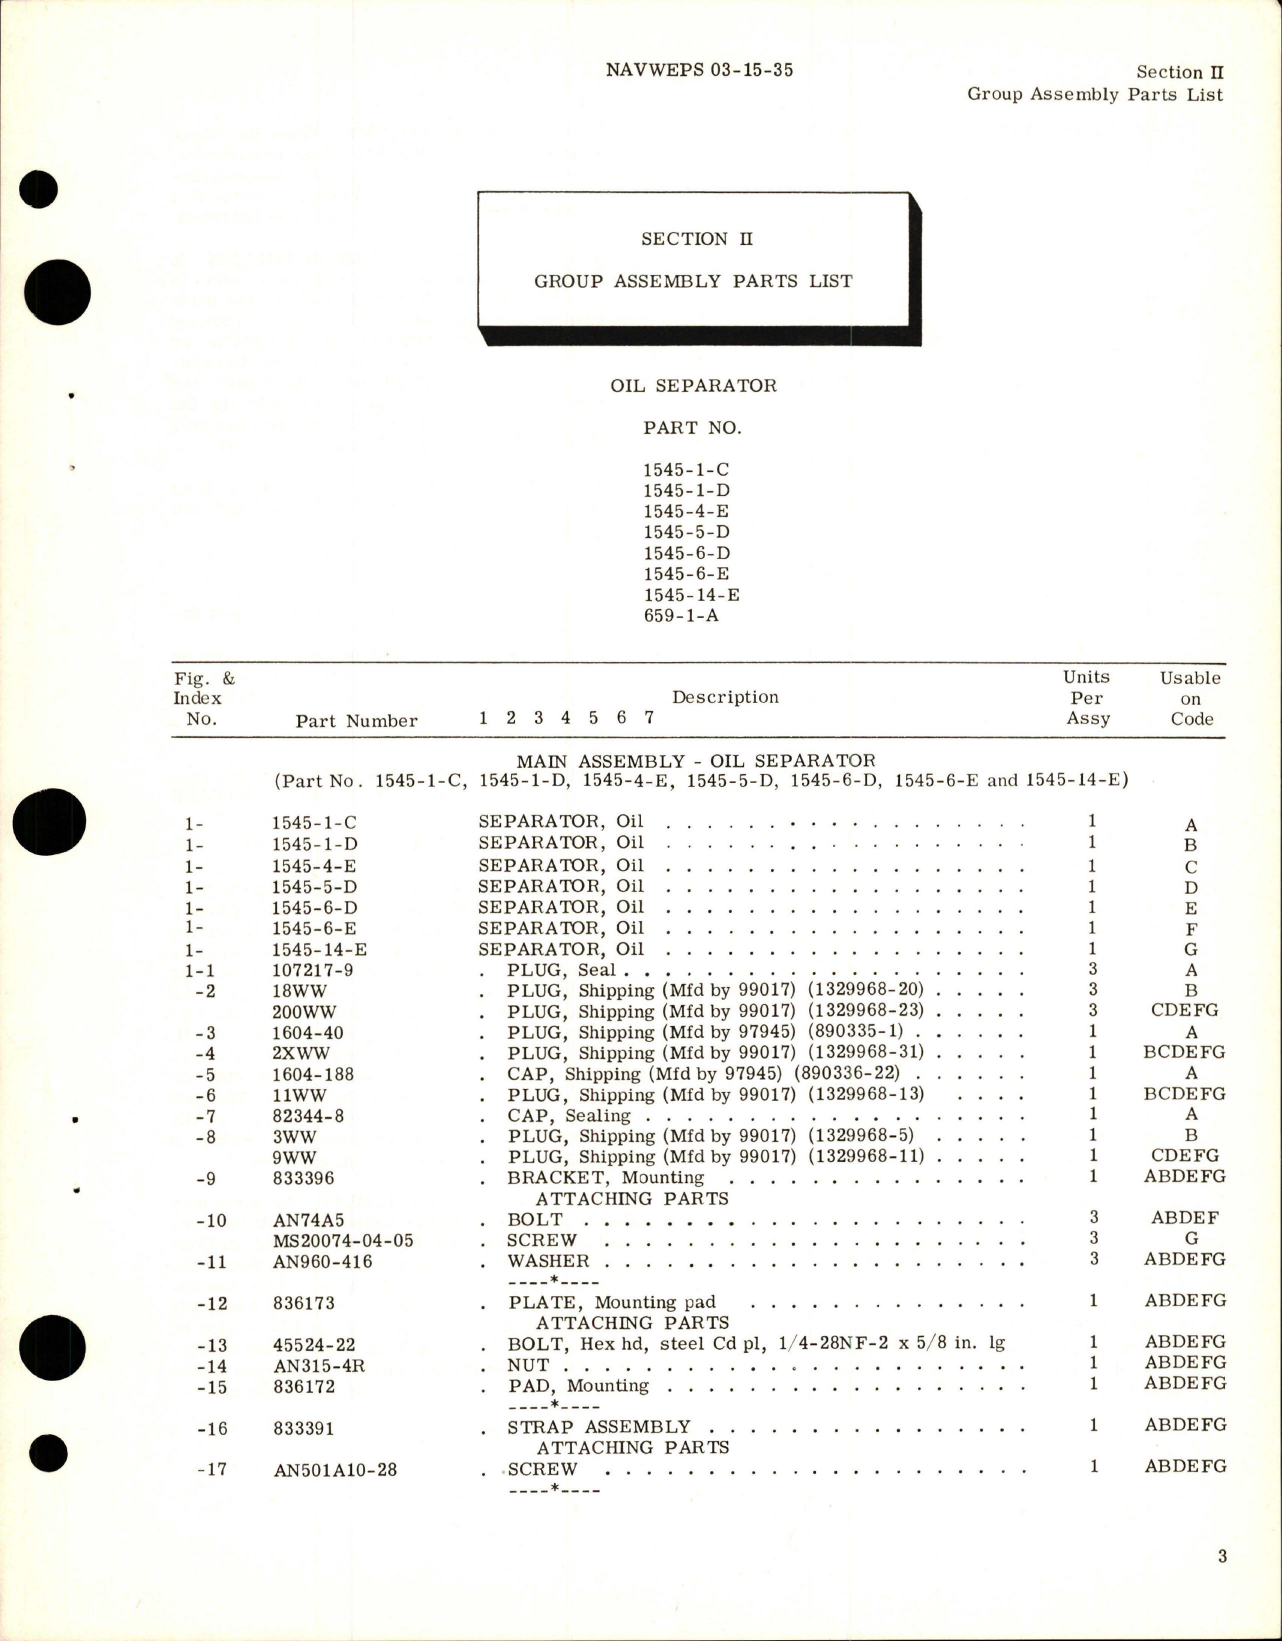 Sample page 7 from AirCorps Library document: Illustrated Parts Breakdown for Oil Separator